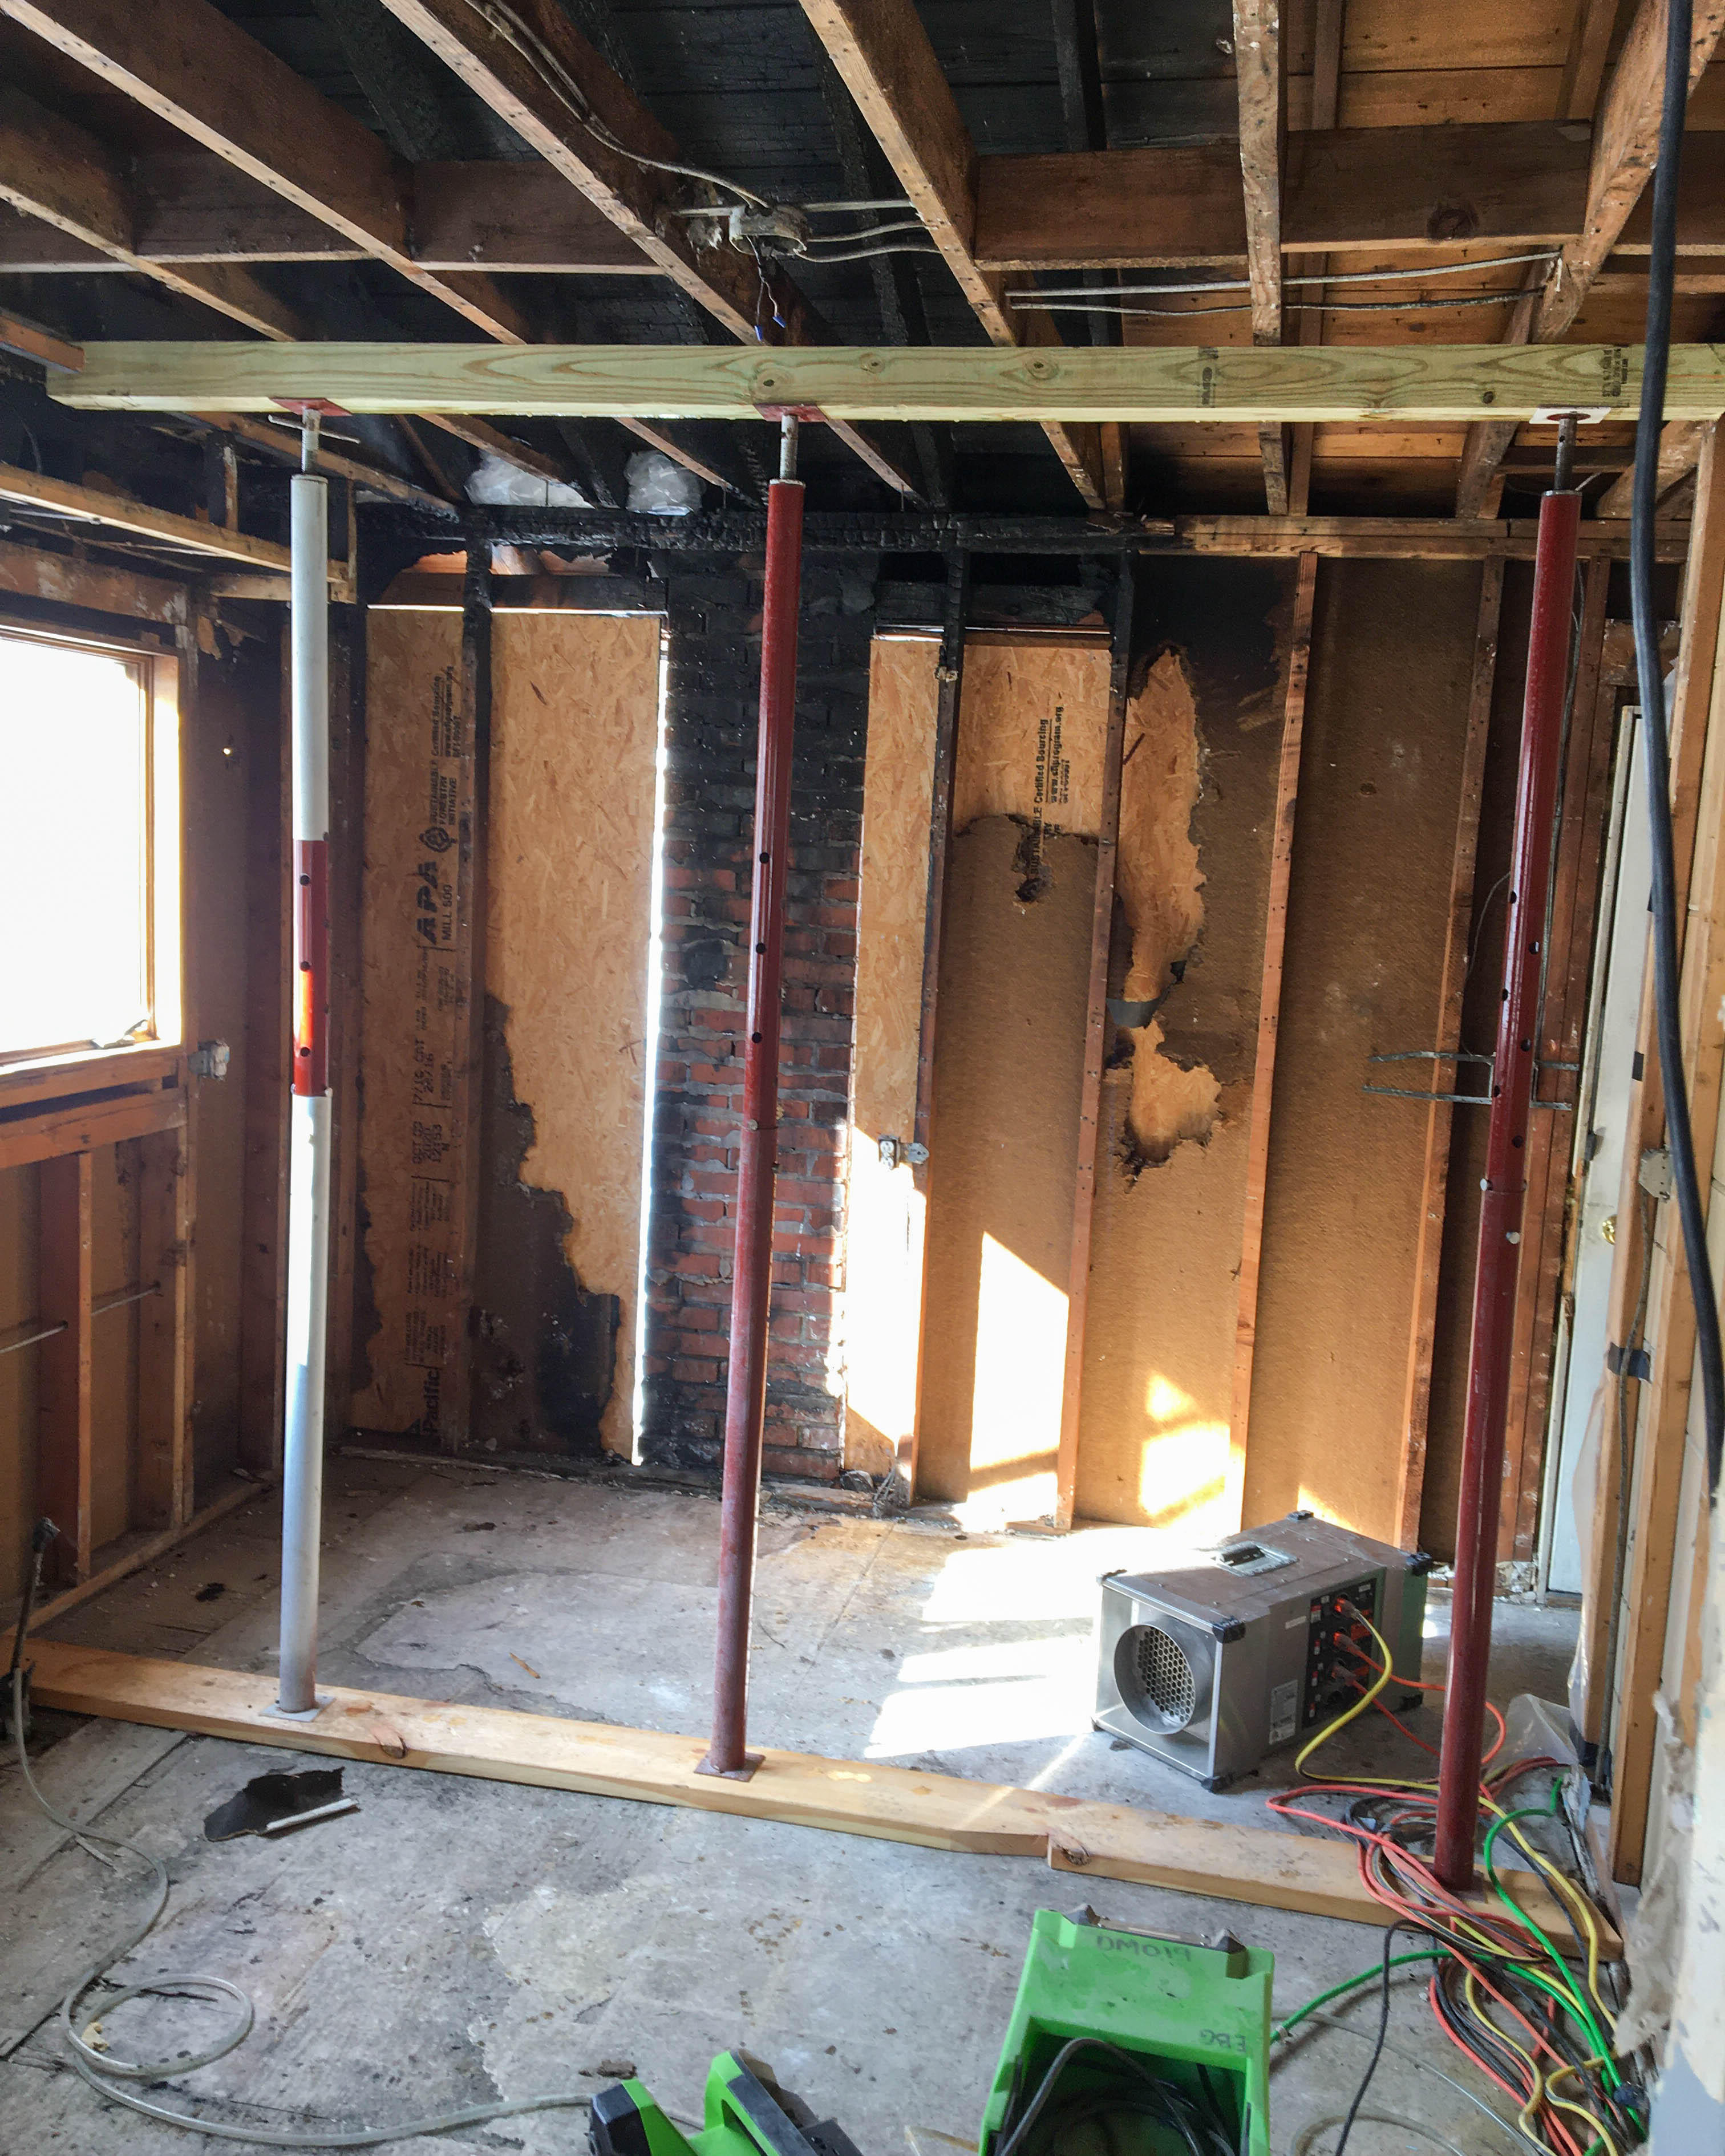 SERVPRO of Ebensburg knows how devastating fire damage can be in your Ebensburg, PA local area. We've been trained to clean and restore your home with minimal disturbance.